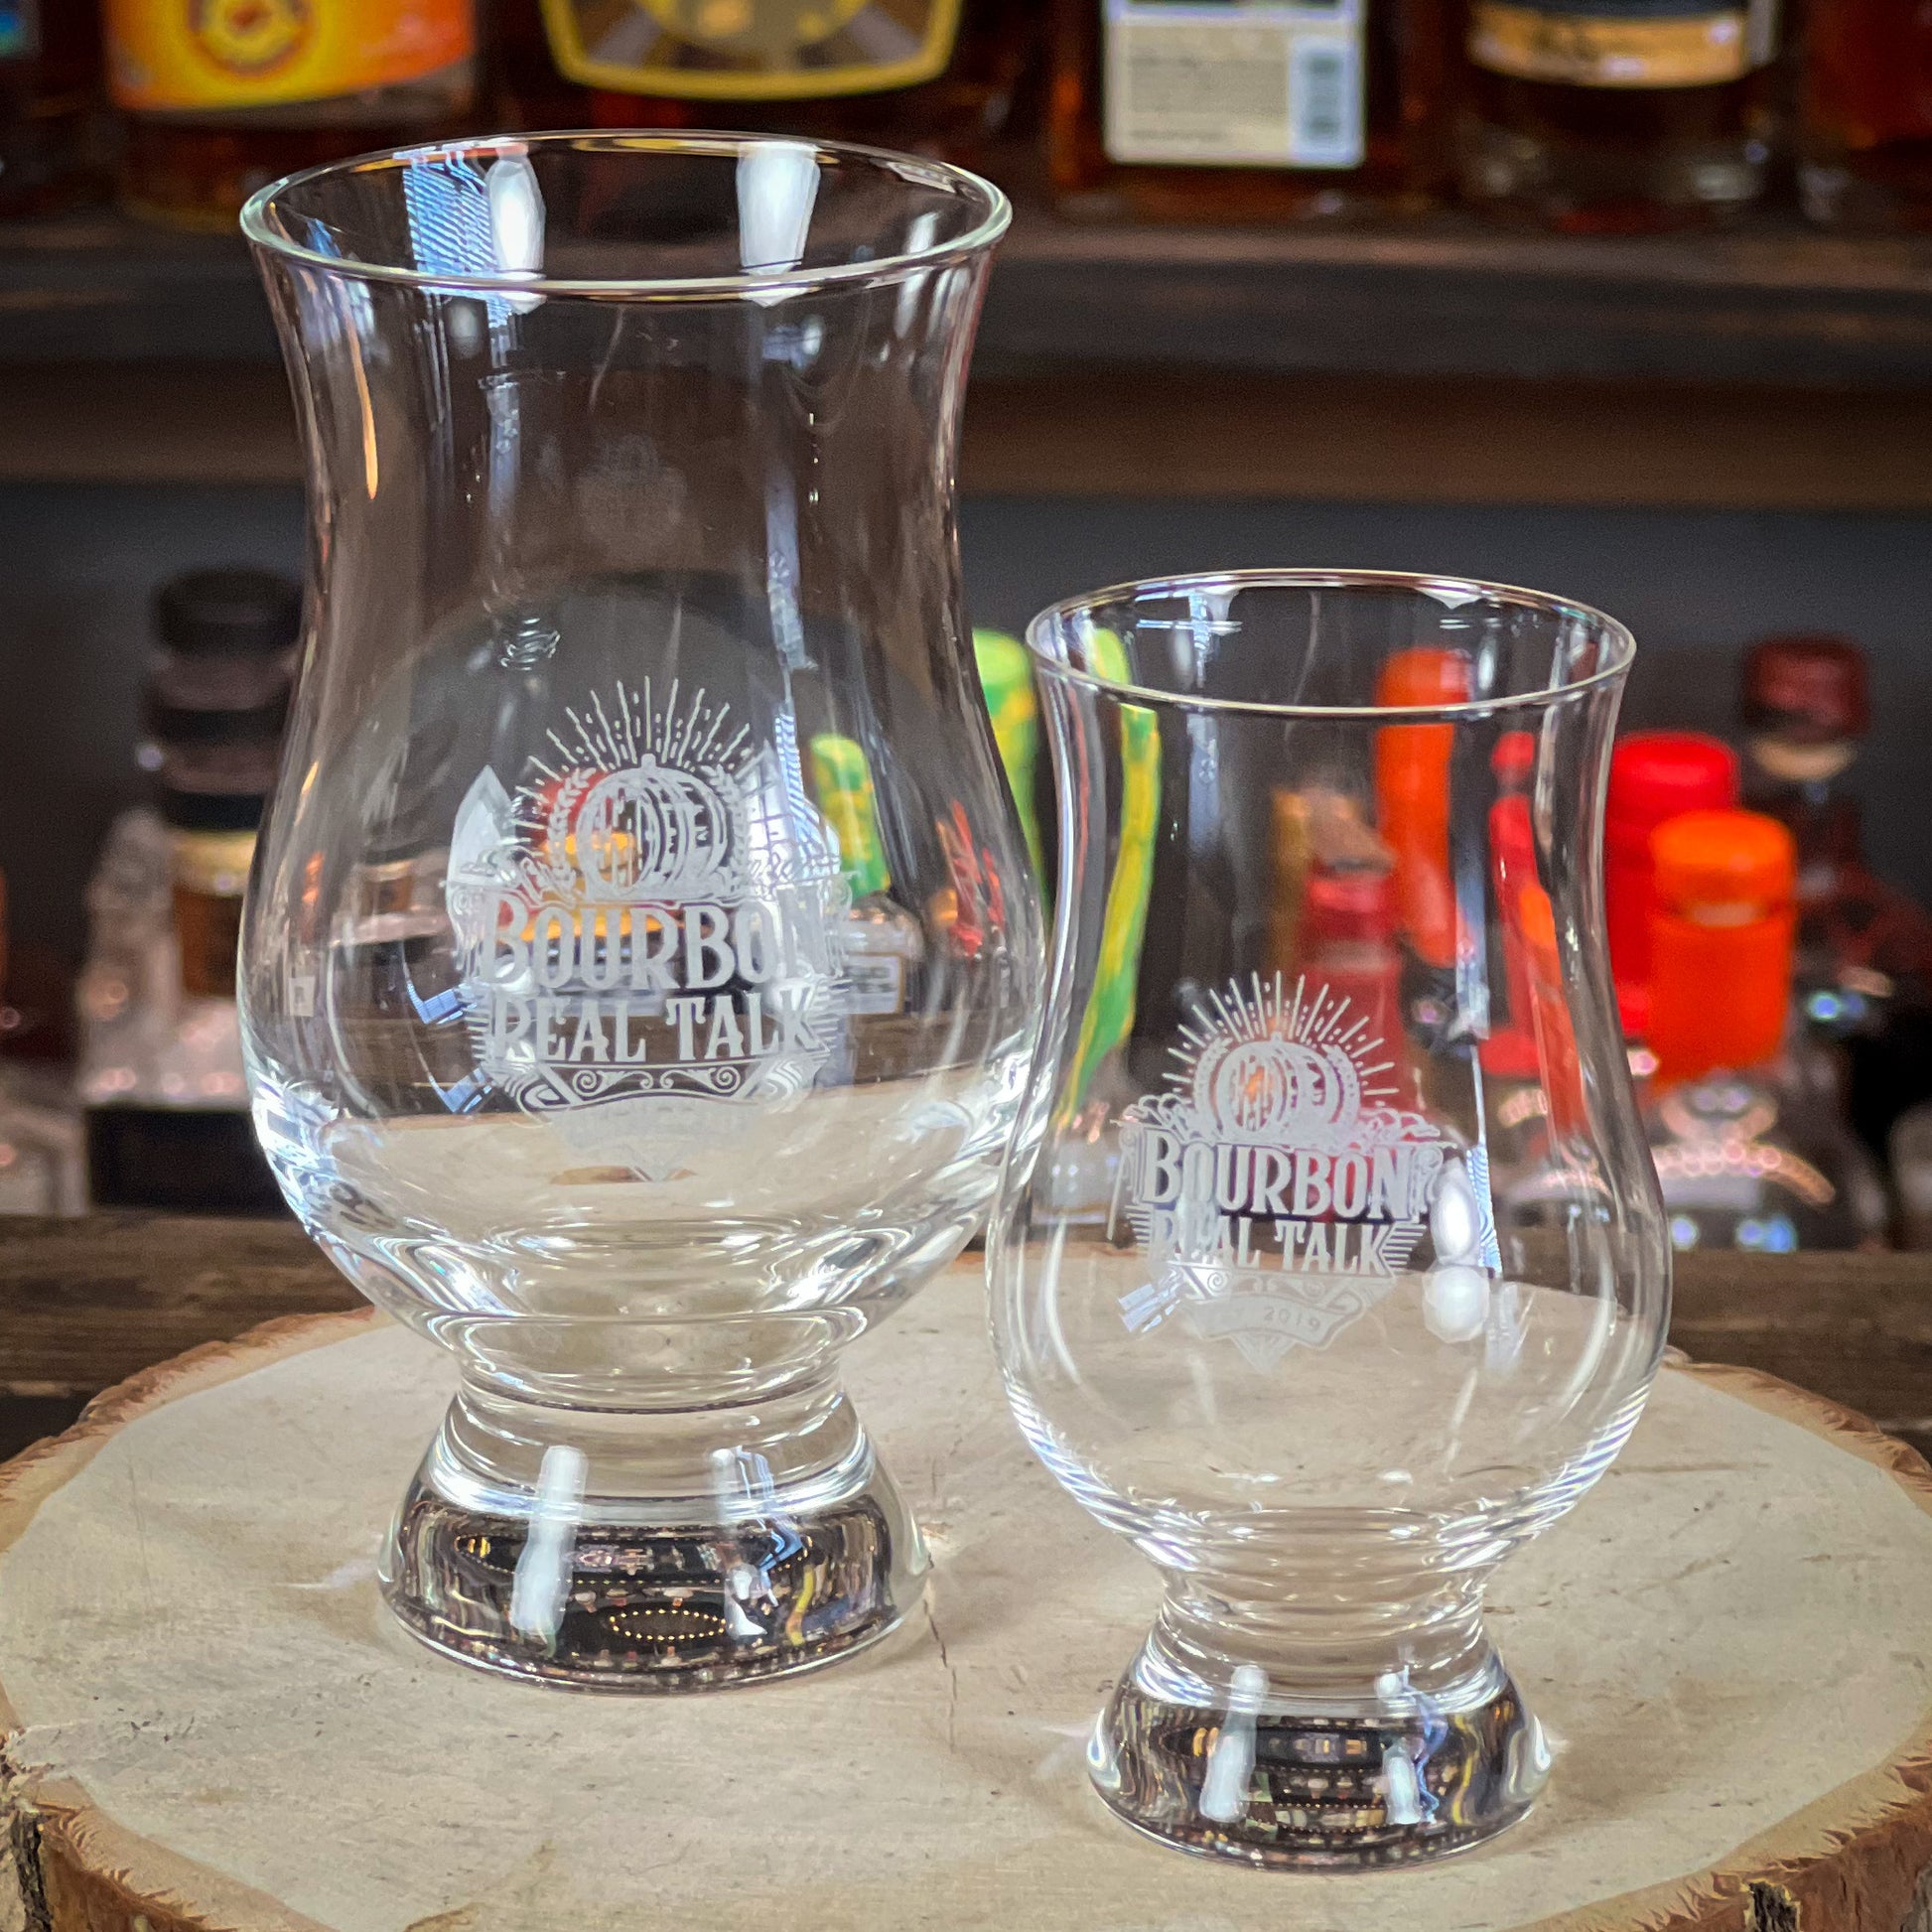 This photo shows two whiskey nosing glasses nosing glasses side by side, one 6oz. one 3oz. on a wooden block with whiskey bottles in the background.